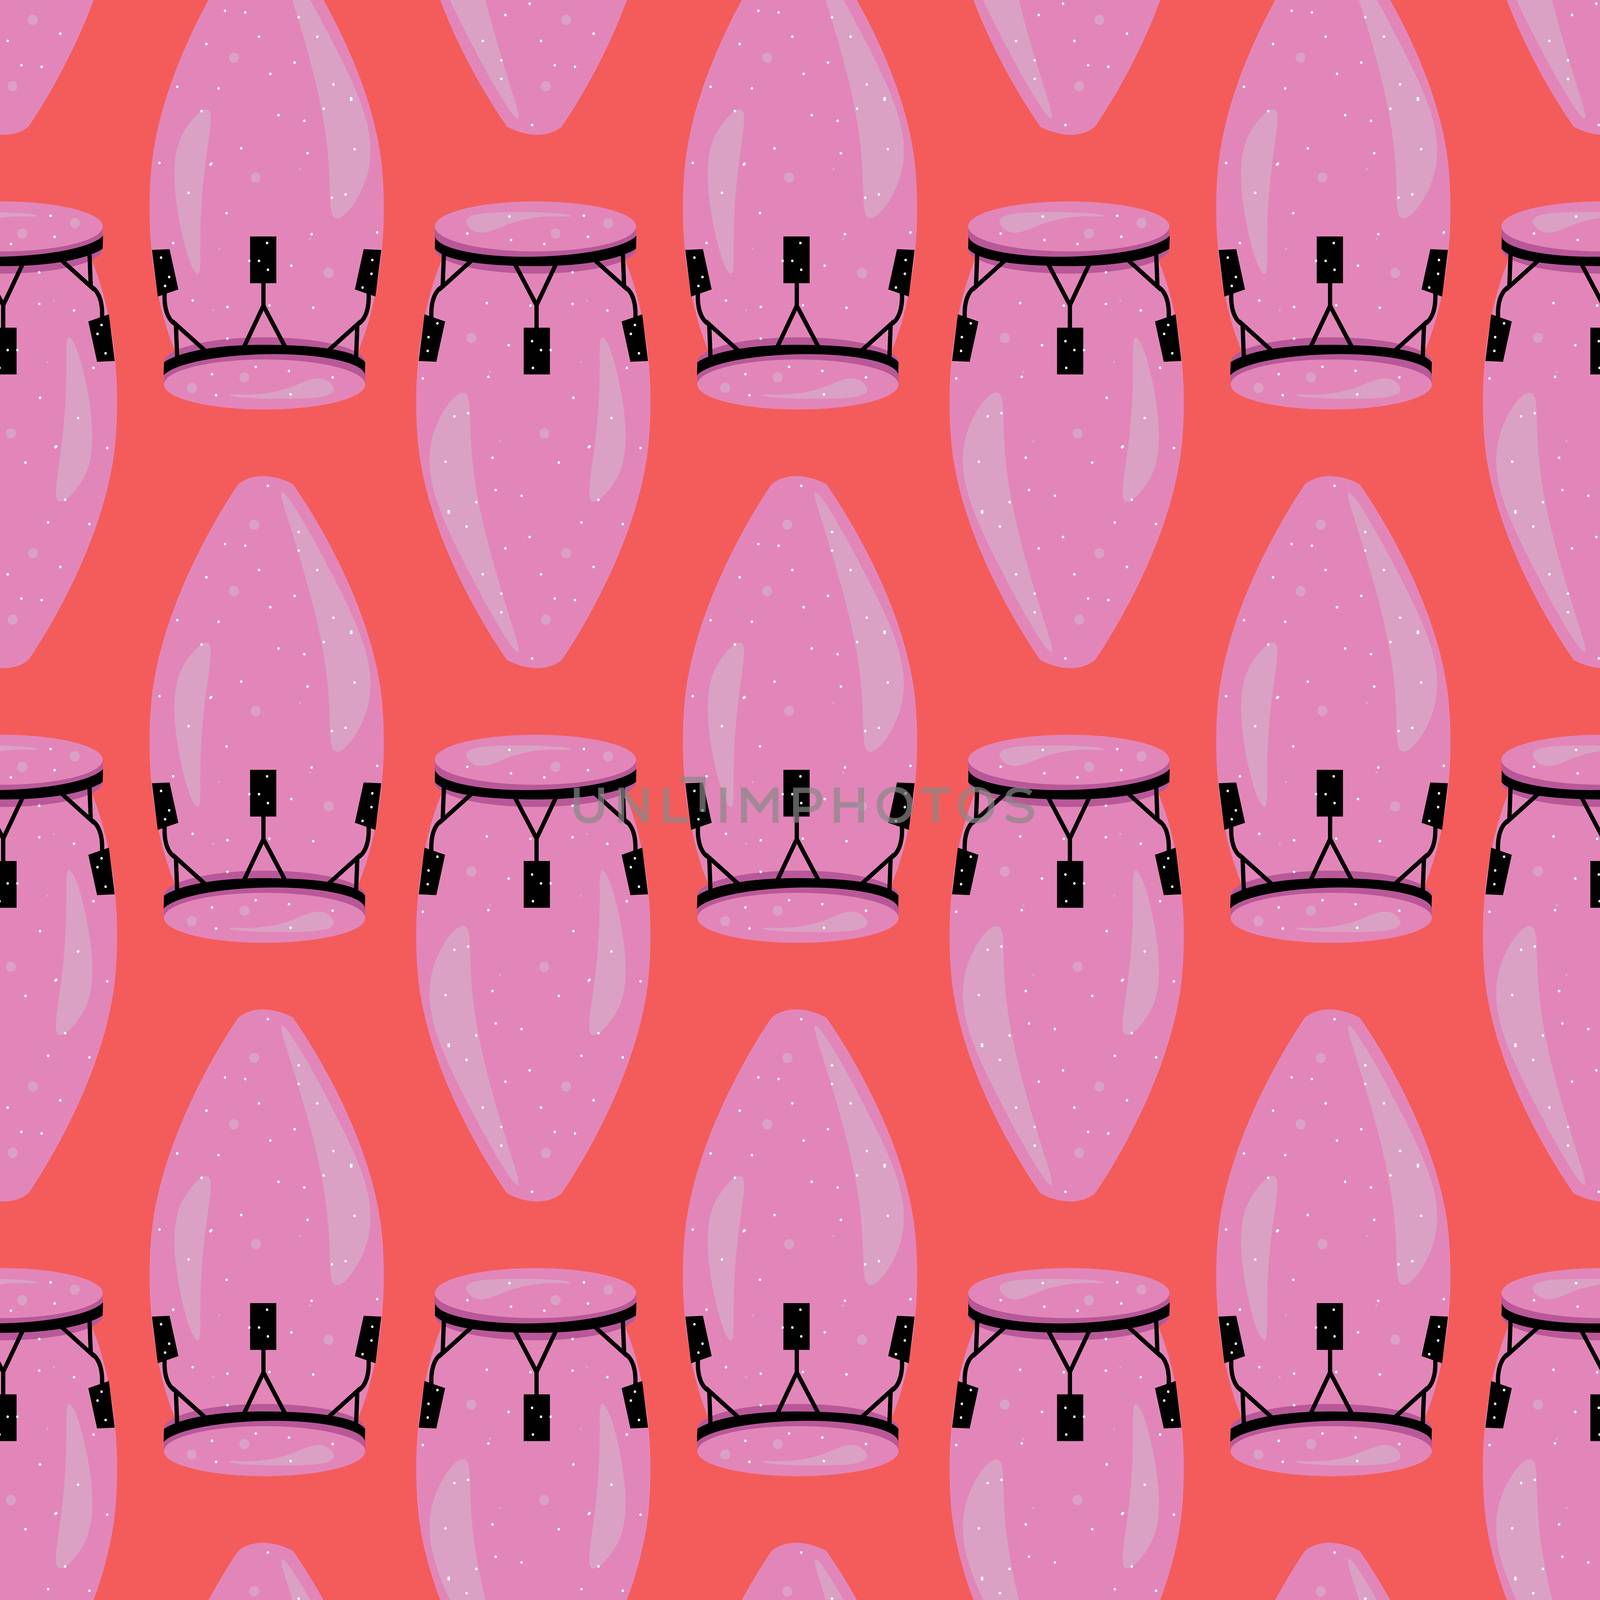 Congas pattern , illustration, vector on white background by Morphart